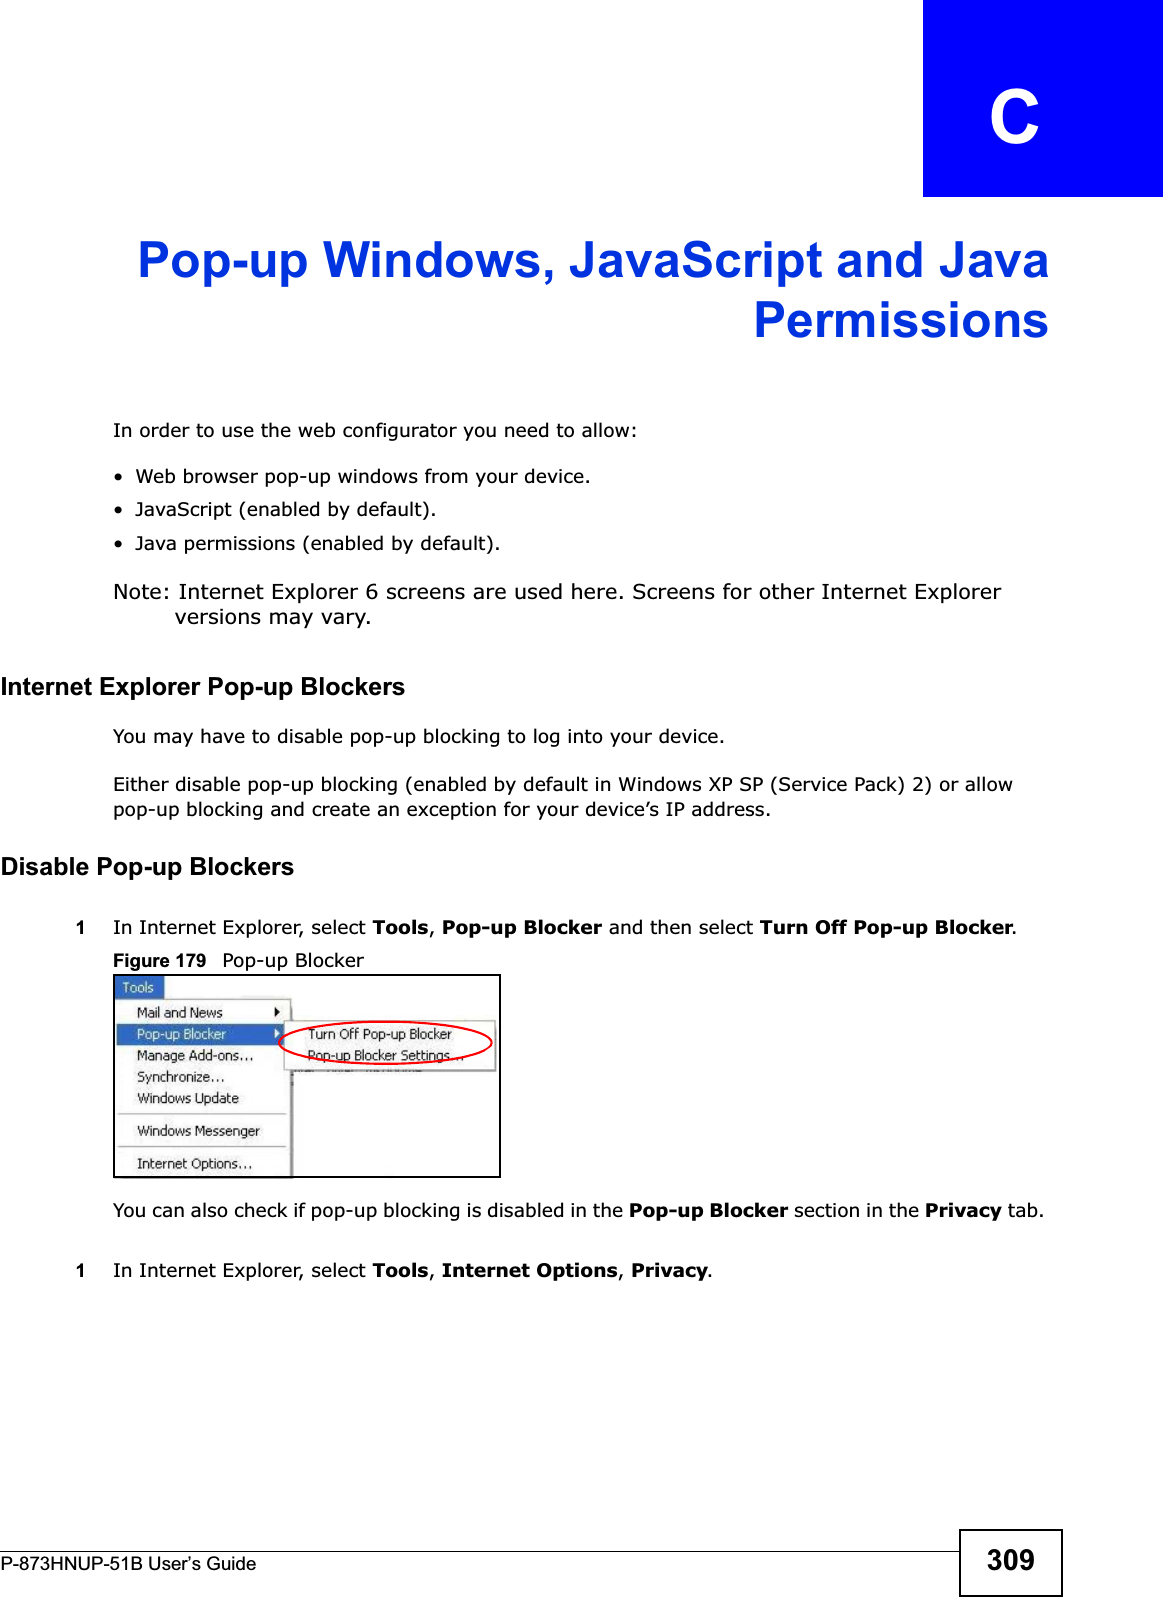 P-873HNUP-51B User’s Guide 309APPENDIX   CPop-up Windows, JavaScript and JavaPermissionsIn order to use the web configurator you need to allow:• Web browser pop-up windows from your device.• JavaScript (enabled by default).• Java permissions (enabled by default).Note: Internet Explorer 6 screens are used here. Screens for other Internet Explorer versions may vary.Internet Explorer Pop-up BlockersYou may have to disable pop-up blocking to log into your device. Either disable pop-up blocking (enabled by default in Windows XP SP (Service Pack) 2) or allow pop-up blocking and create an exception for your device’s IP address.Disable Pop-up Blockers1In Internet Explorer, select Tools,Pop-up Blocker and then select Turn Off Pop-up Blocker.Figure 179   Pop-up BlockerYou can also check if pop-up blocking is disabled in the Pop-up Blocker section in the Privacy tab. 1In Internet Explorer, select Tools,Internet Options,Privacy.